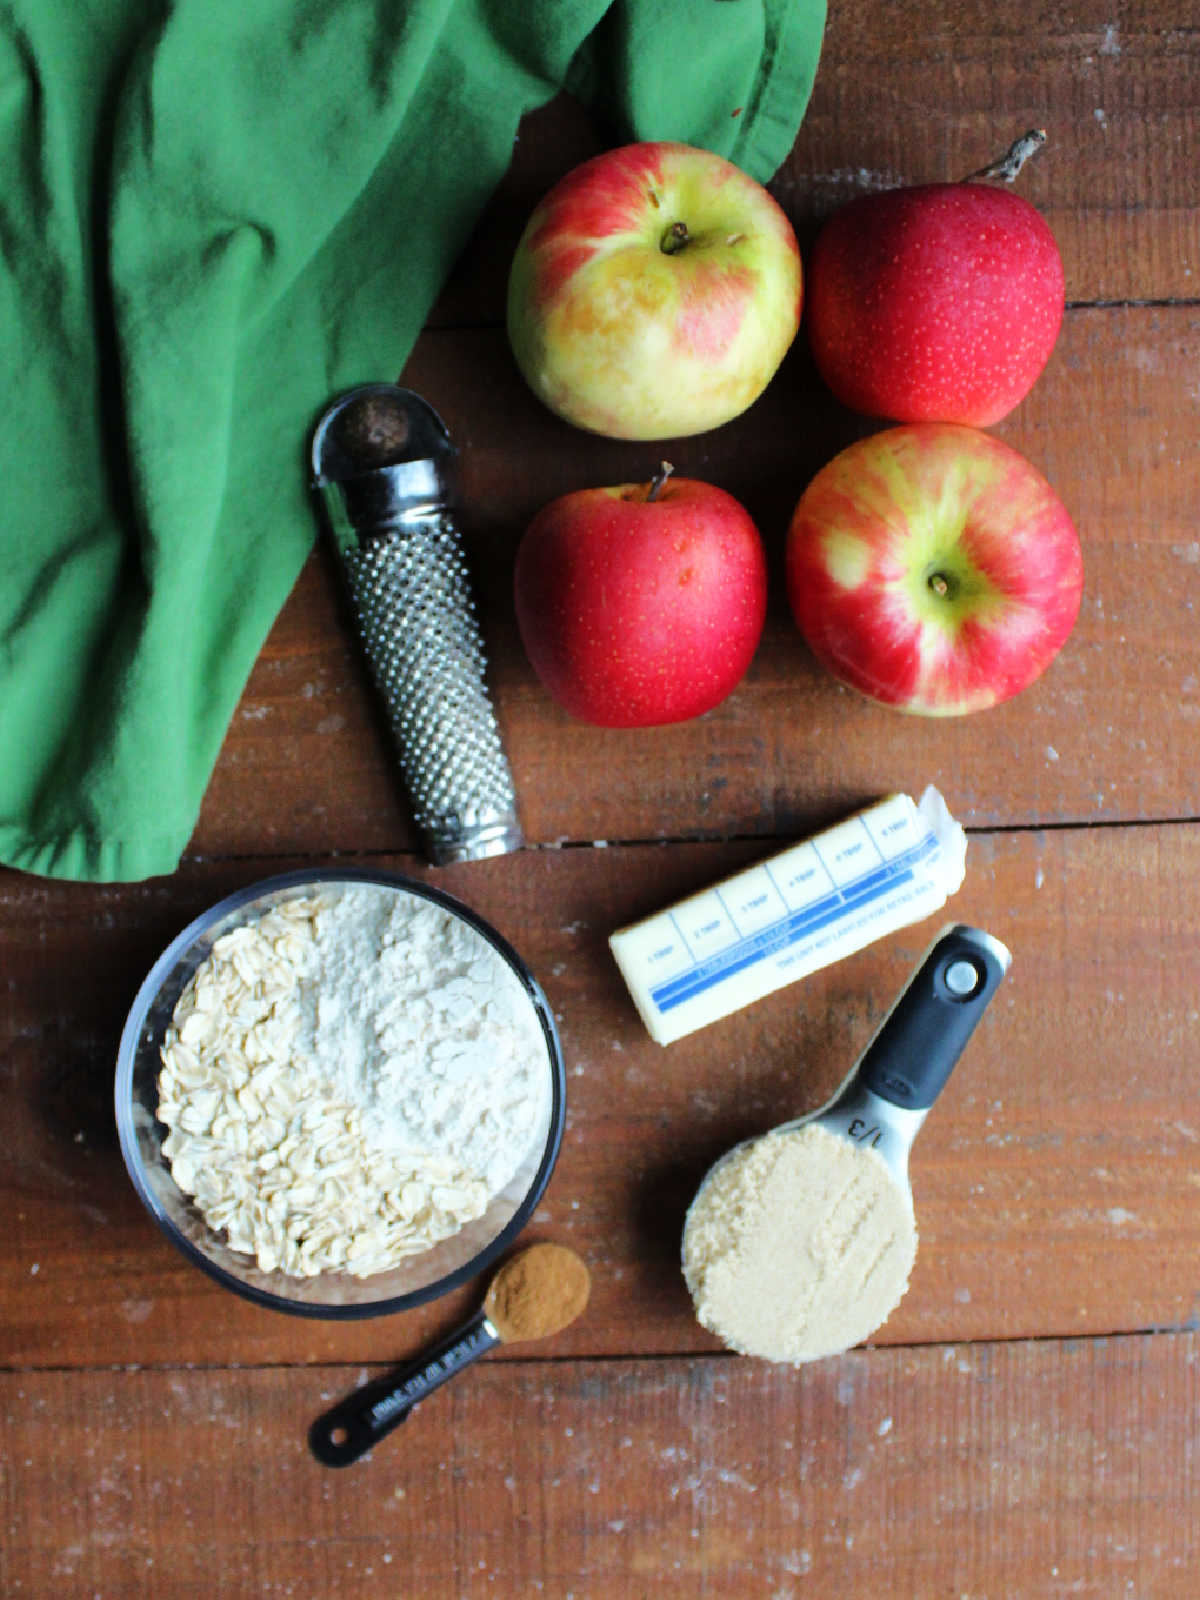 Ingredients including apples, butter, brown sugar, flour, oats, cinnamon, and nutmeg ready to be made into stuffed baked apple halves.